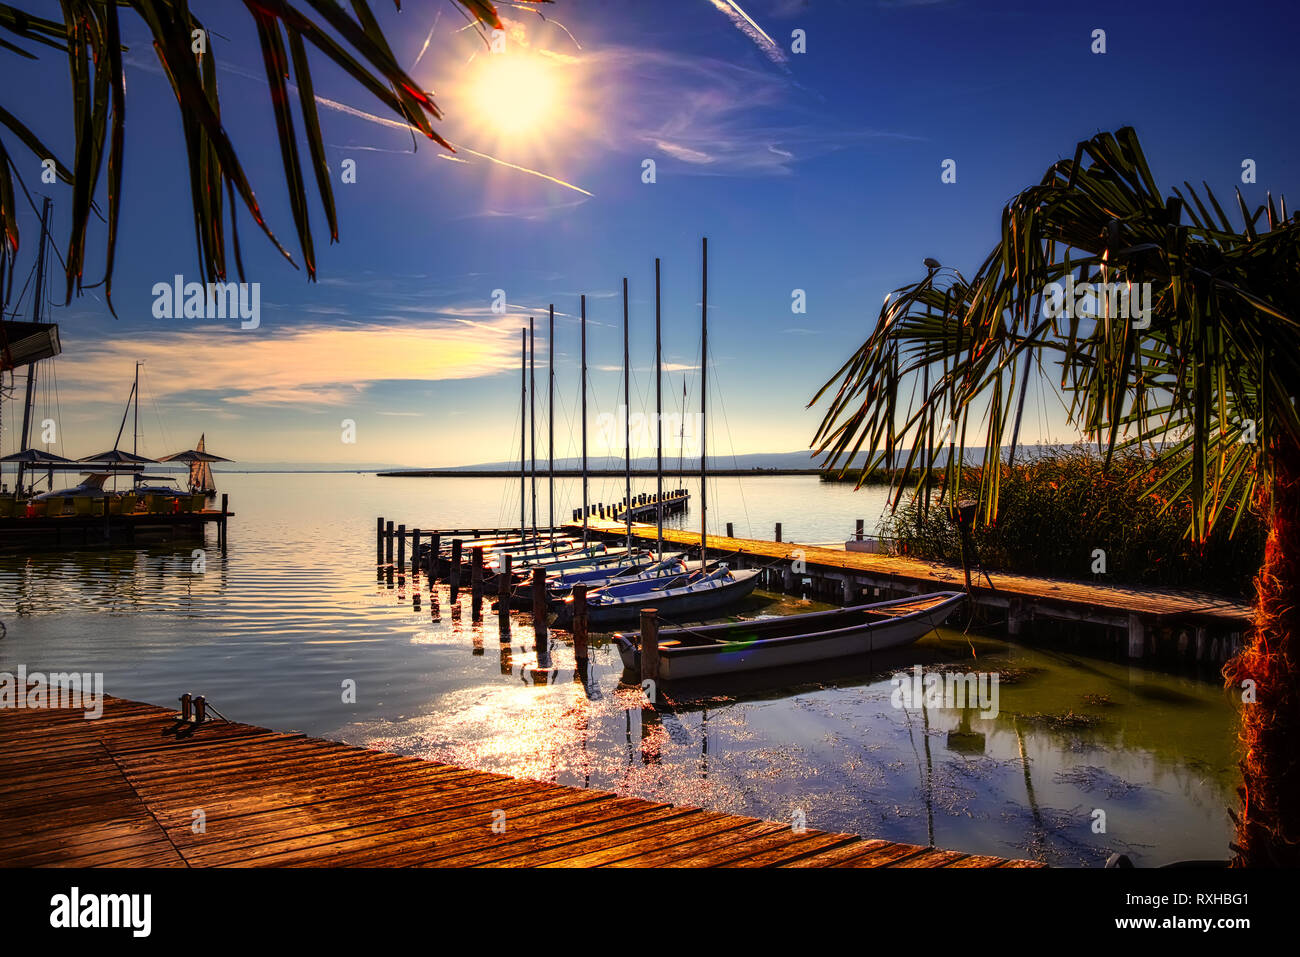 Small harbour at Lake Neusiedl in Austria with Boats and sailing ships. Neusiedl am See is located on the northern shore of the Neusiedler See. Stock Photo